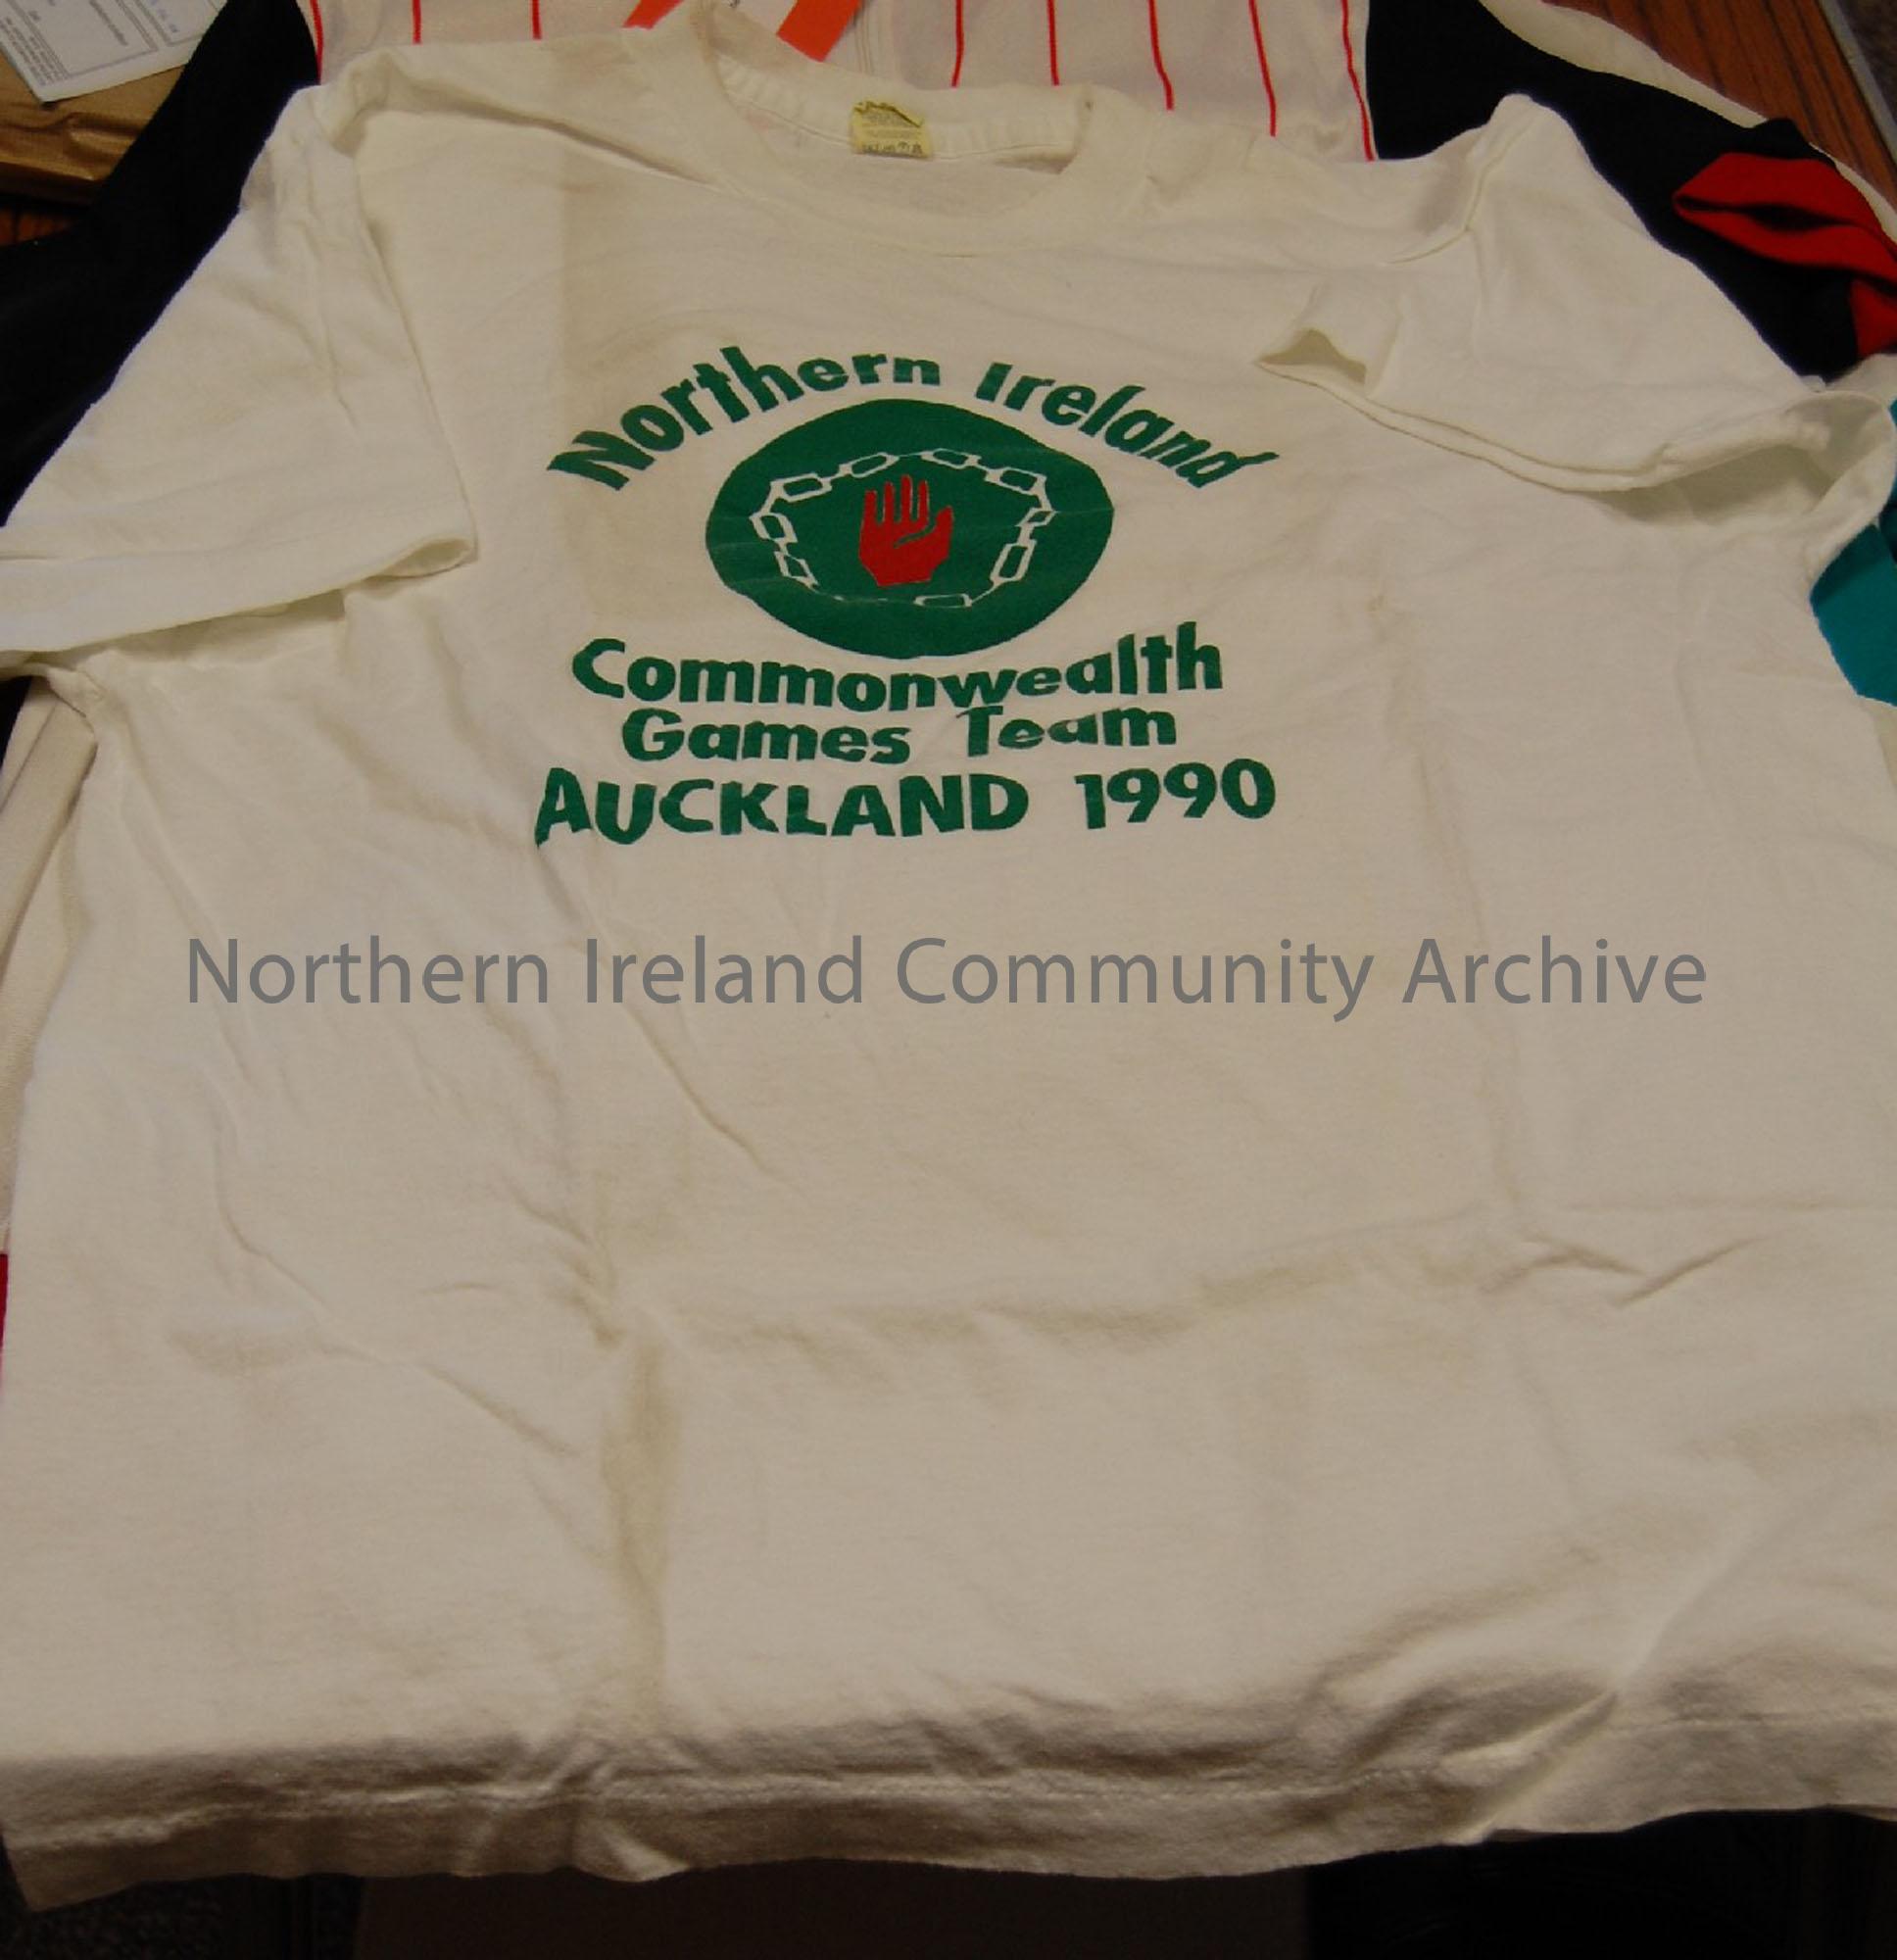 Ballymoney and District Cycle Club t-shirt. Worn during Commonwealth Games, 1990.